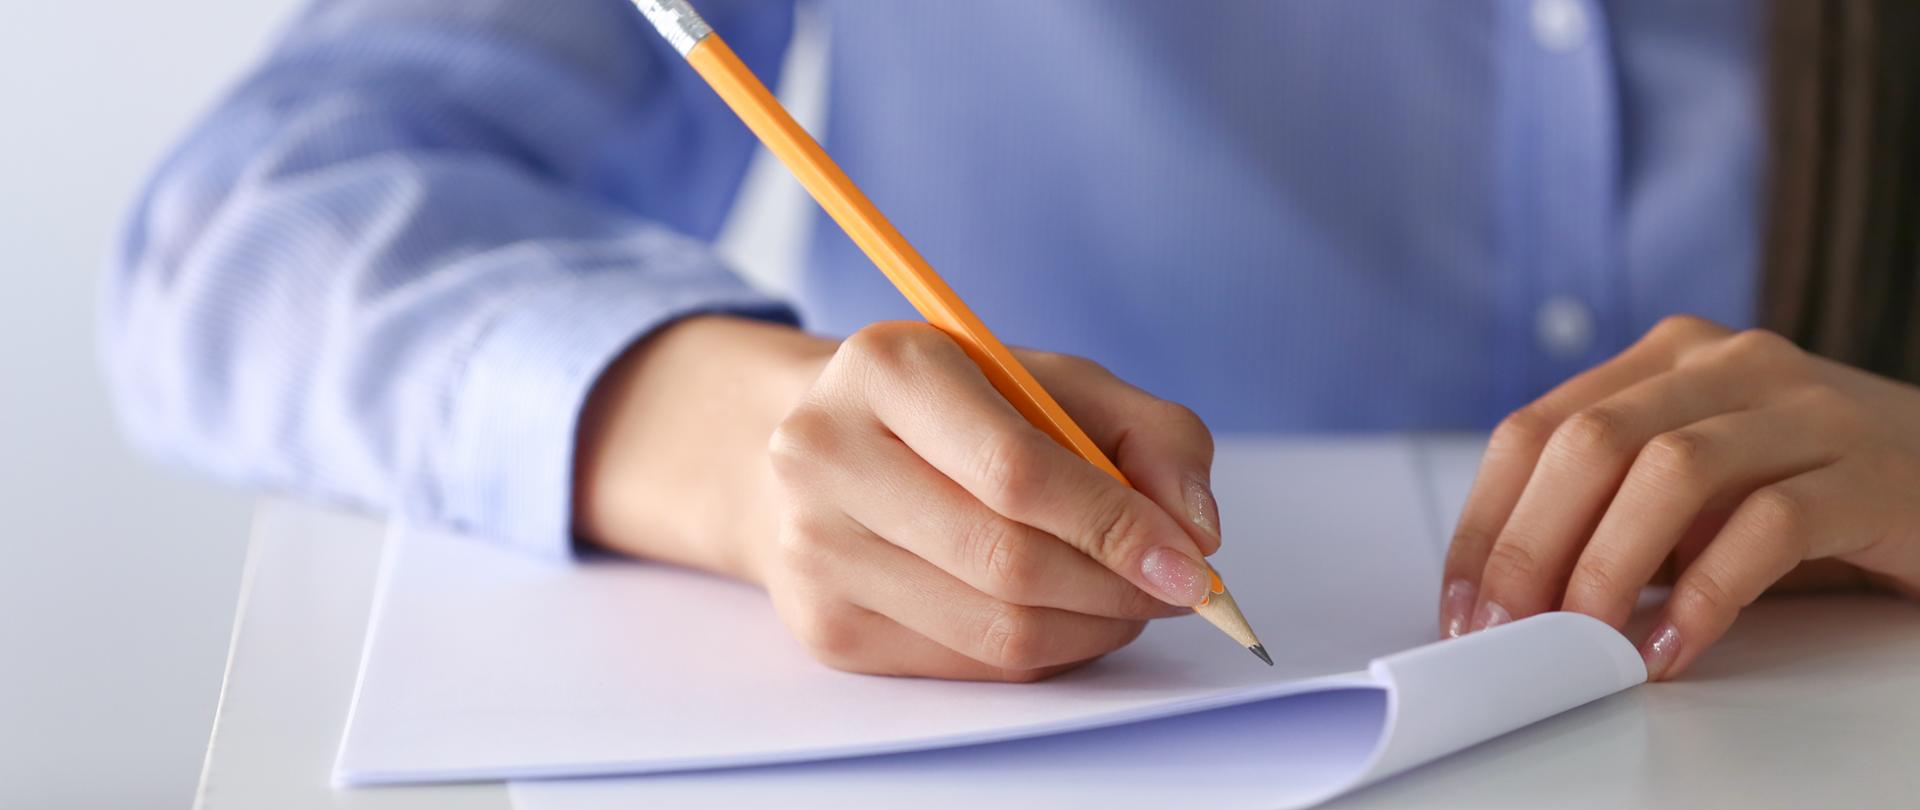 Young female student writing on sheet of paper, closeup